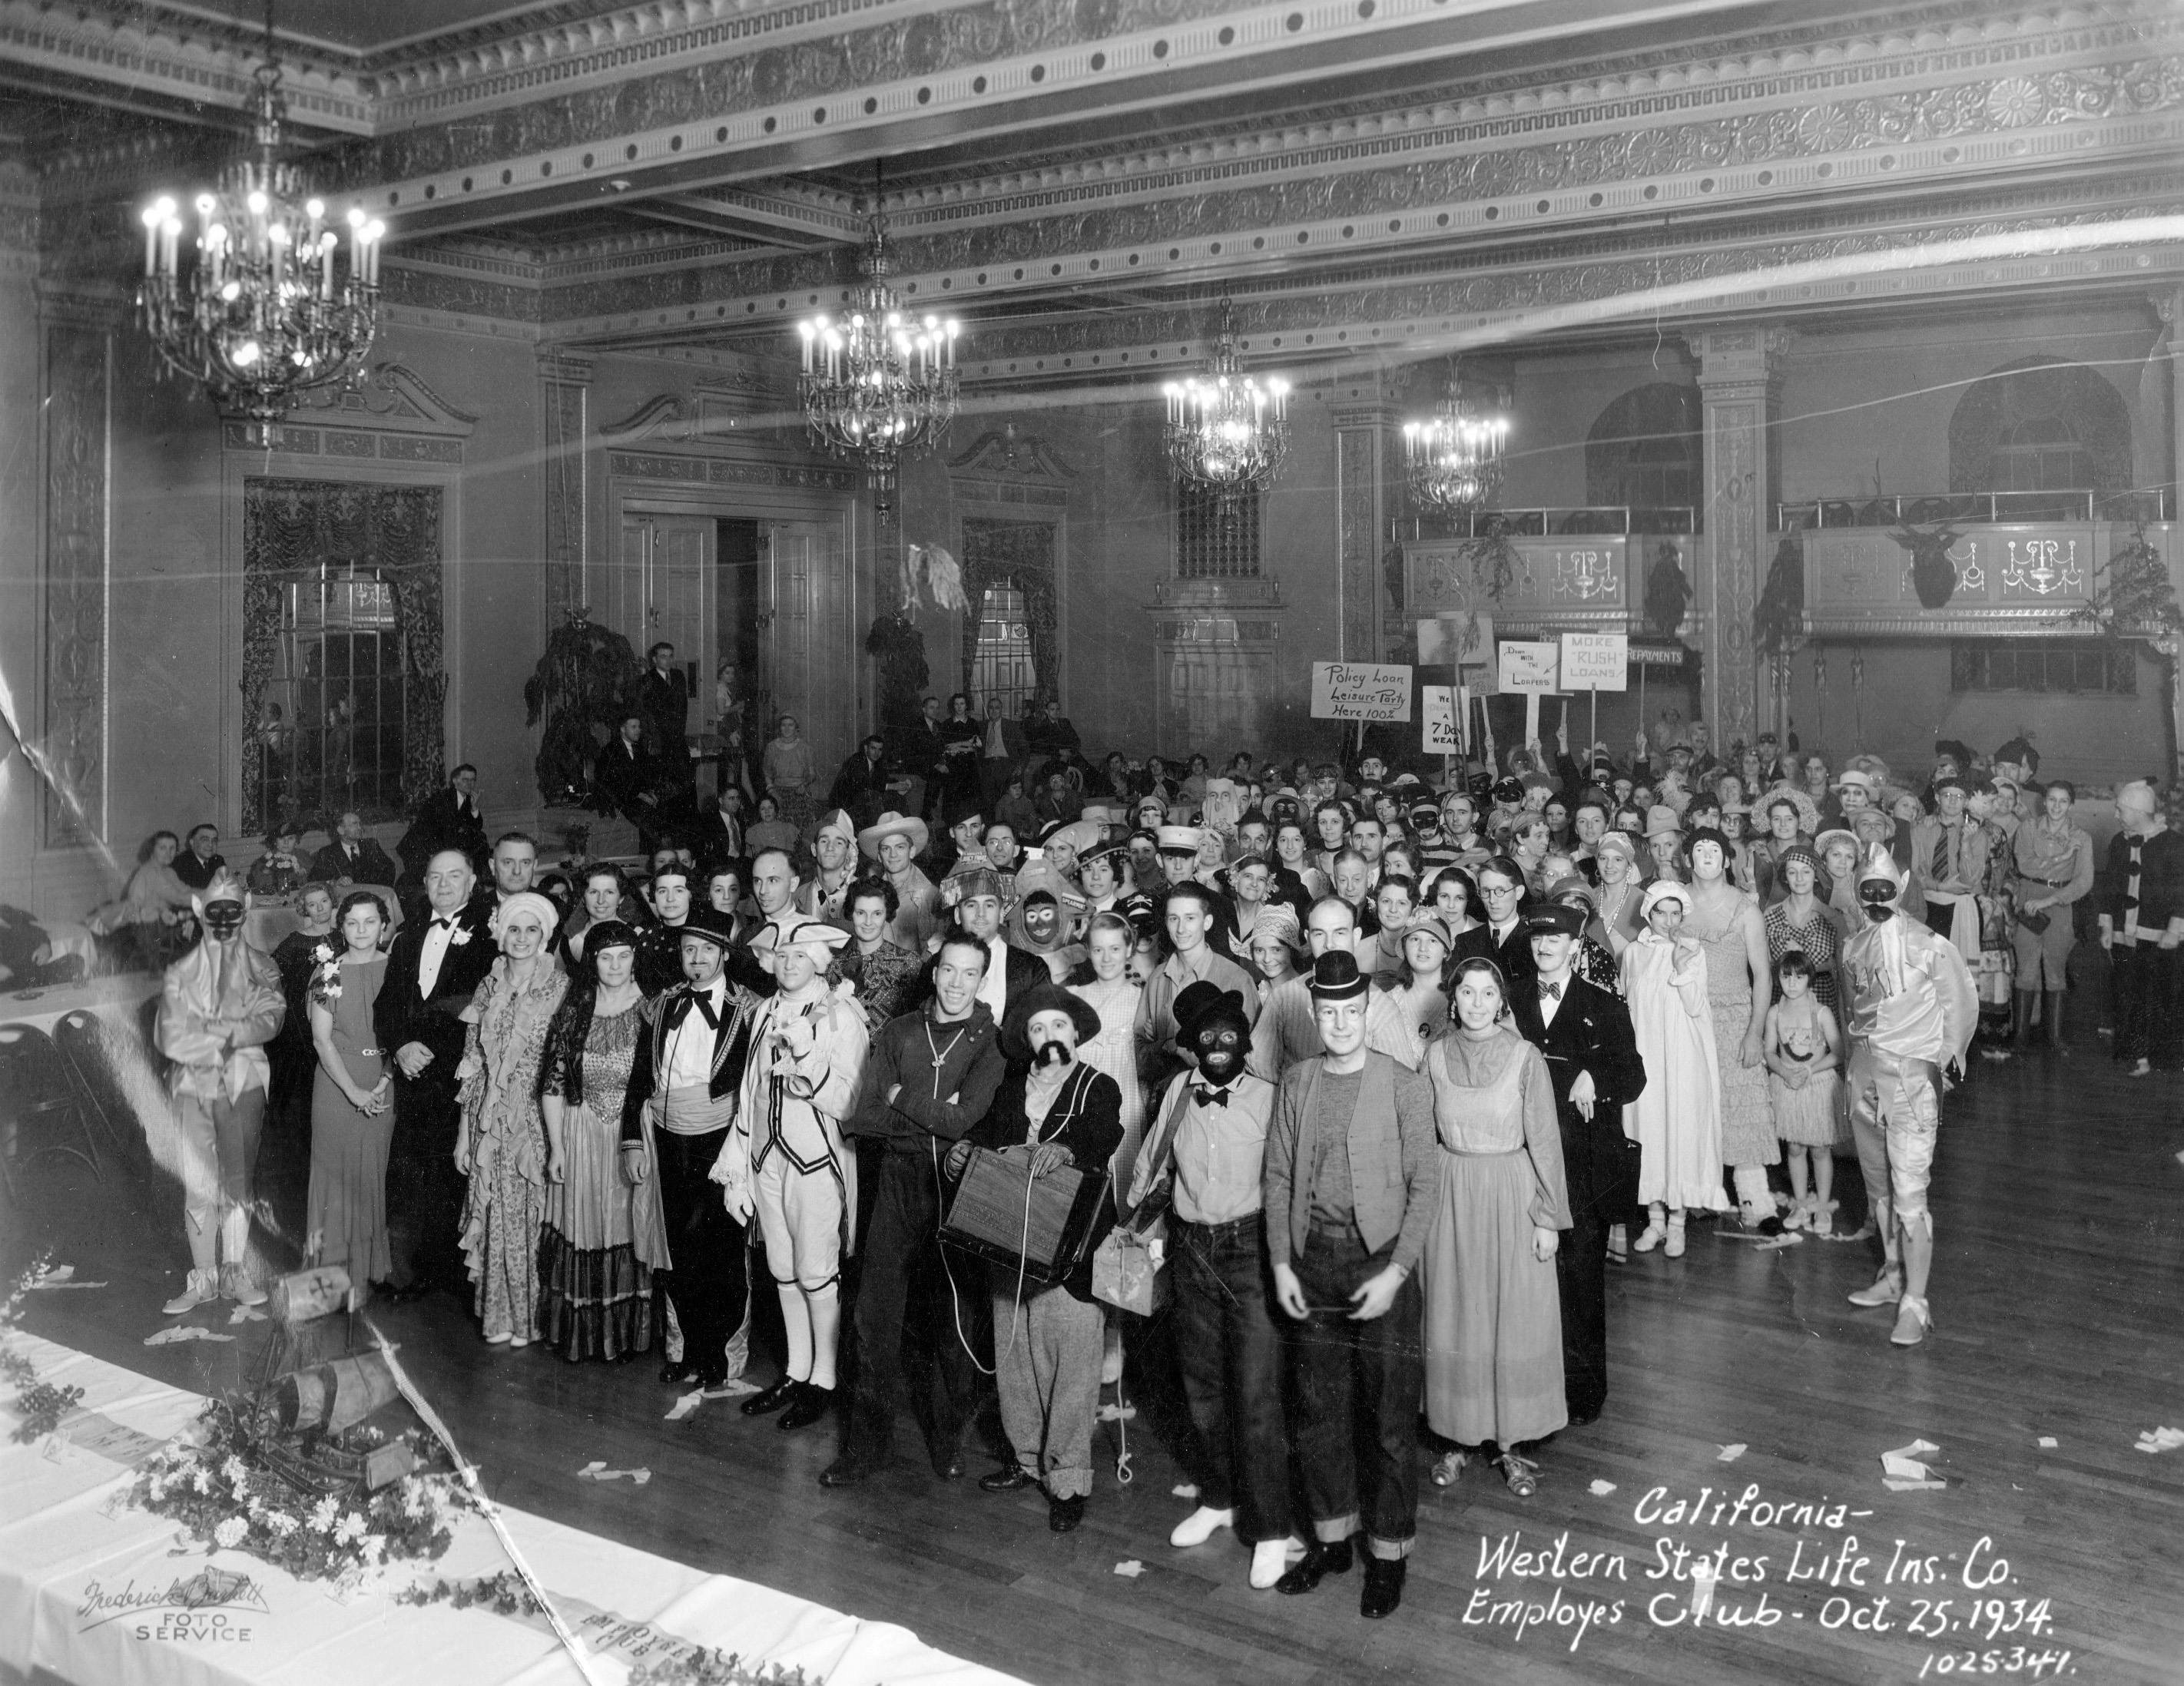 Costume party for the Western States Life Insurance Company Employees' Club, Oct. 25, 1934. I think this was taken in the Grand Ballroom of the Masonic Temple in Sacramento at 1123 J Street, which still exists. One of the employees was my wife's aunt, who I believe is three rows back on the right and hidden by the conductor; her friend Marion is in front and to the right of her. View full size.  